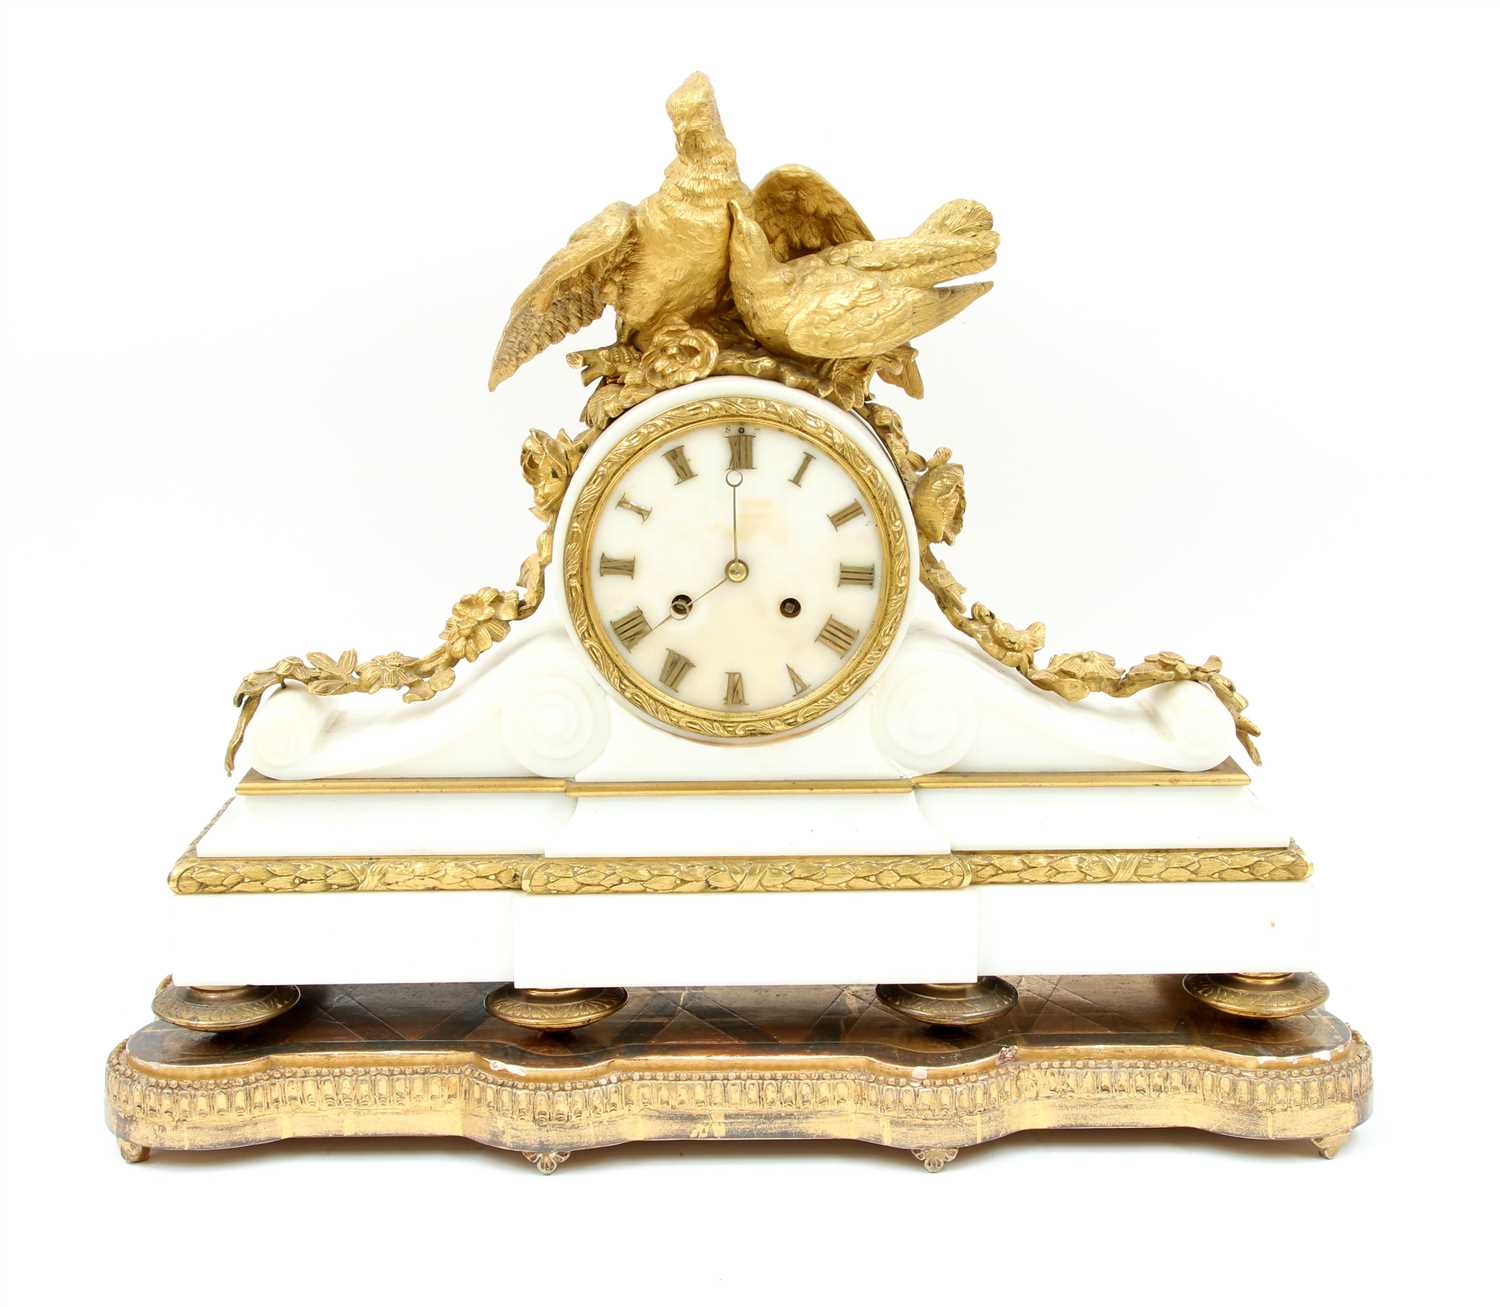 Lot 32 - A French alabaster and ormolu mantel clock